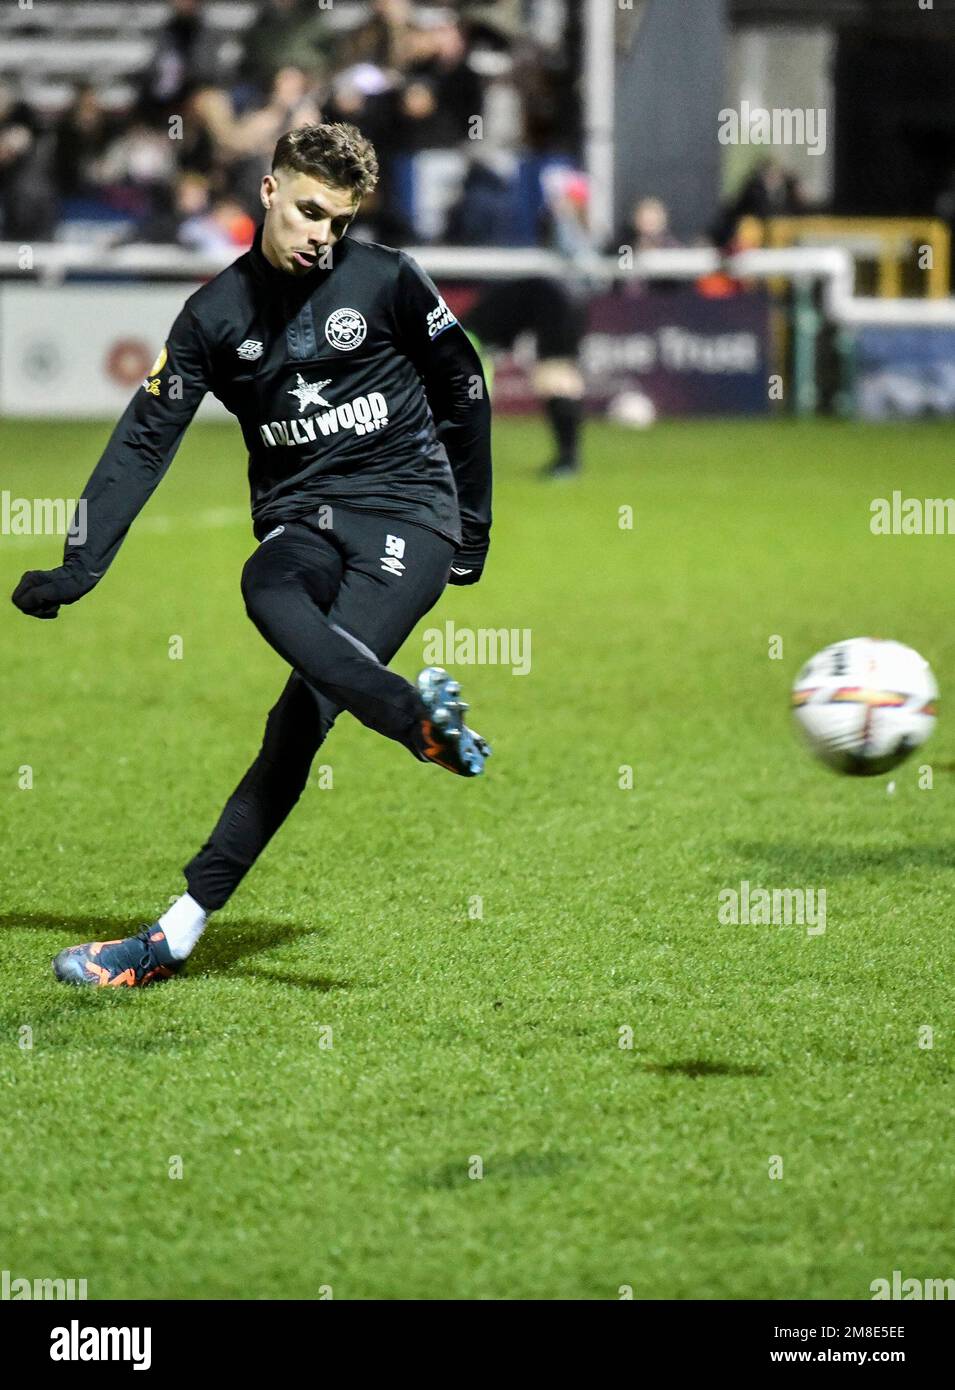 Woking, UK. 13th Jan, 2023. WOKING, ENGLAND - JANUARY 13: Romeo Beckham of Brentford B in action during the Premier League Cup match between Brentford B and Aston Villa U21 at The Laithwaite Community Stadium on January 13, 2023 in Woking, England. (Photo MB Media/Sipa USA) Credit: Sipa USA/Alamy Live News Stock Photo